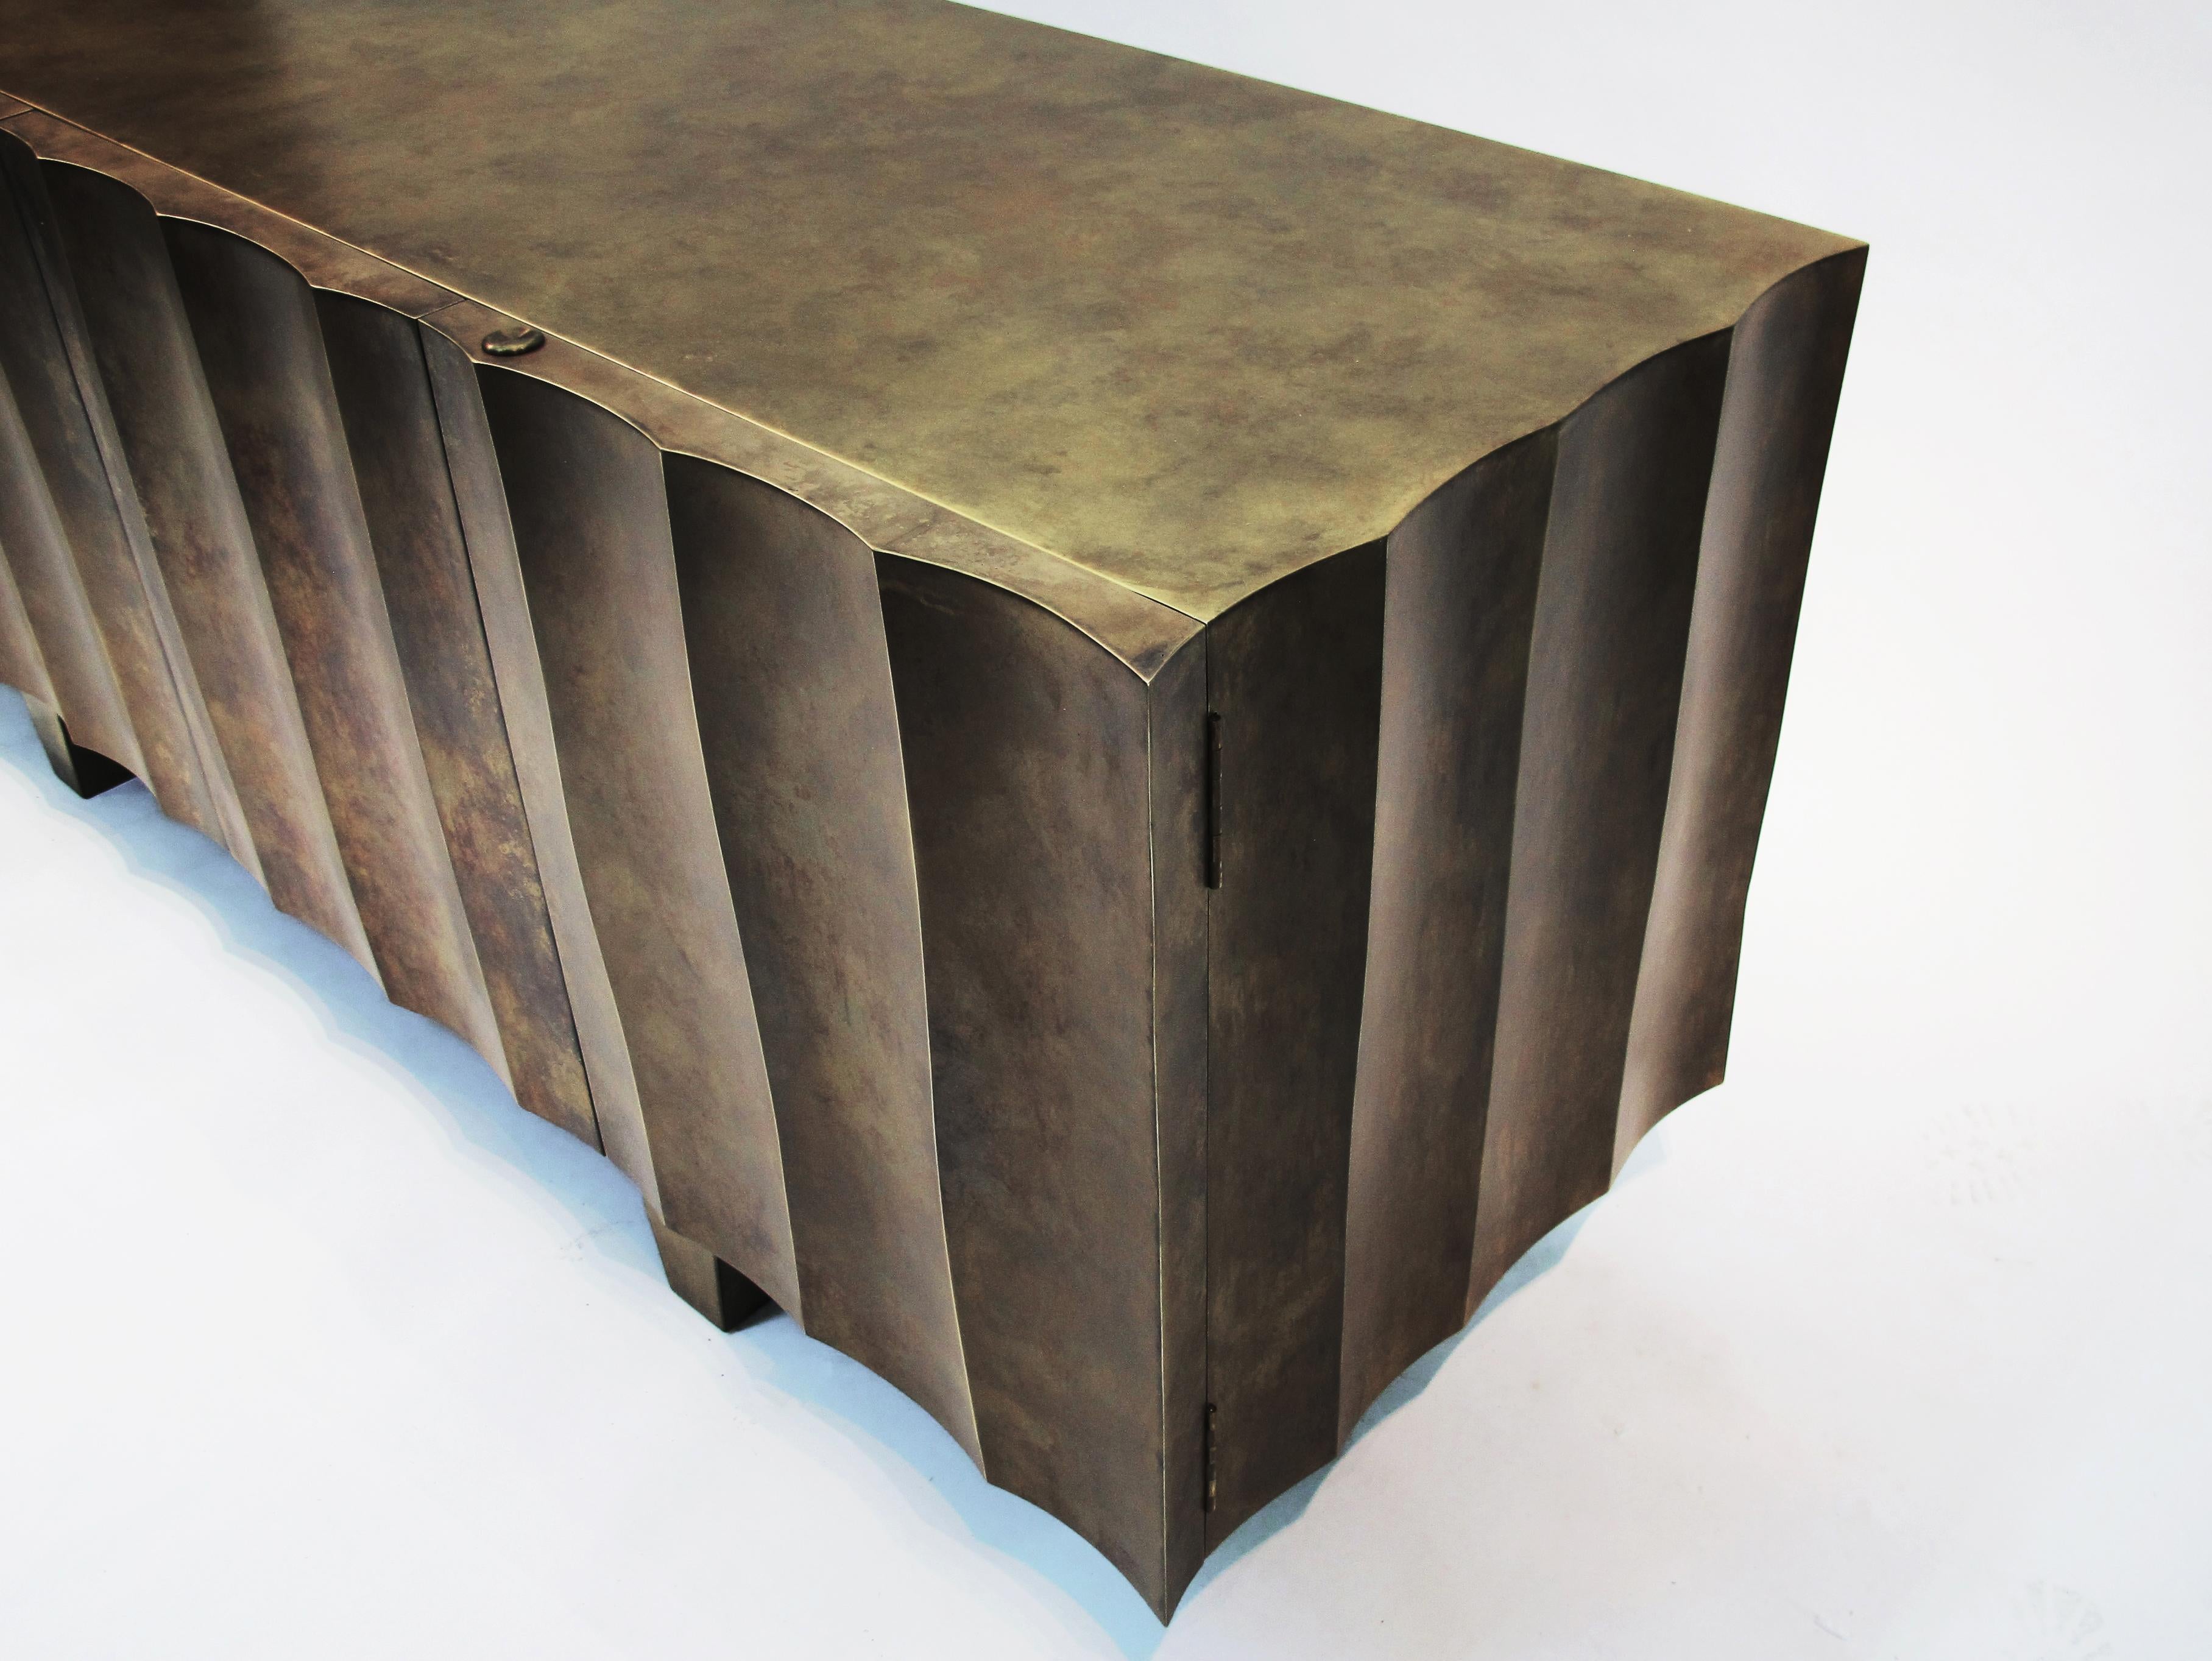 Uluwatsu sideboard- signed by Stefan Leo
Forged iron, Top marble
Brass, patinated 
Measures: 200 x 50cm, H:74 cm

Atelier Stefan Leo has a remarkable reputation thanks to its unique furniture designs created with the finest craftsmanship,